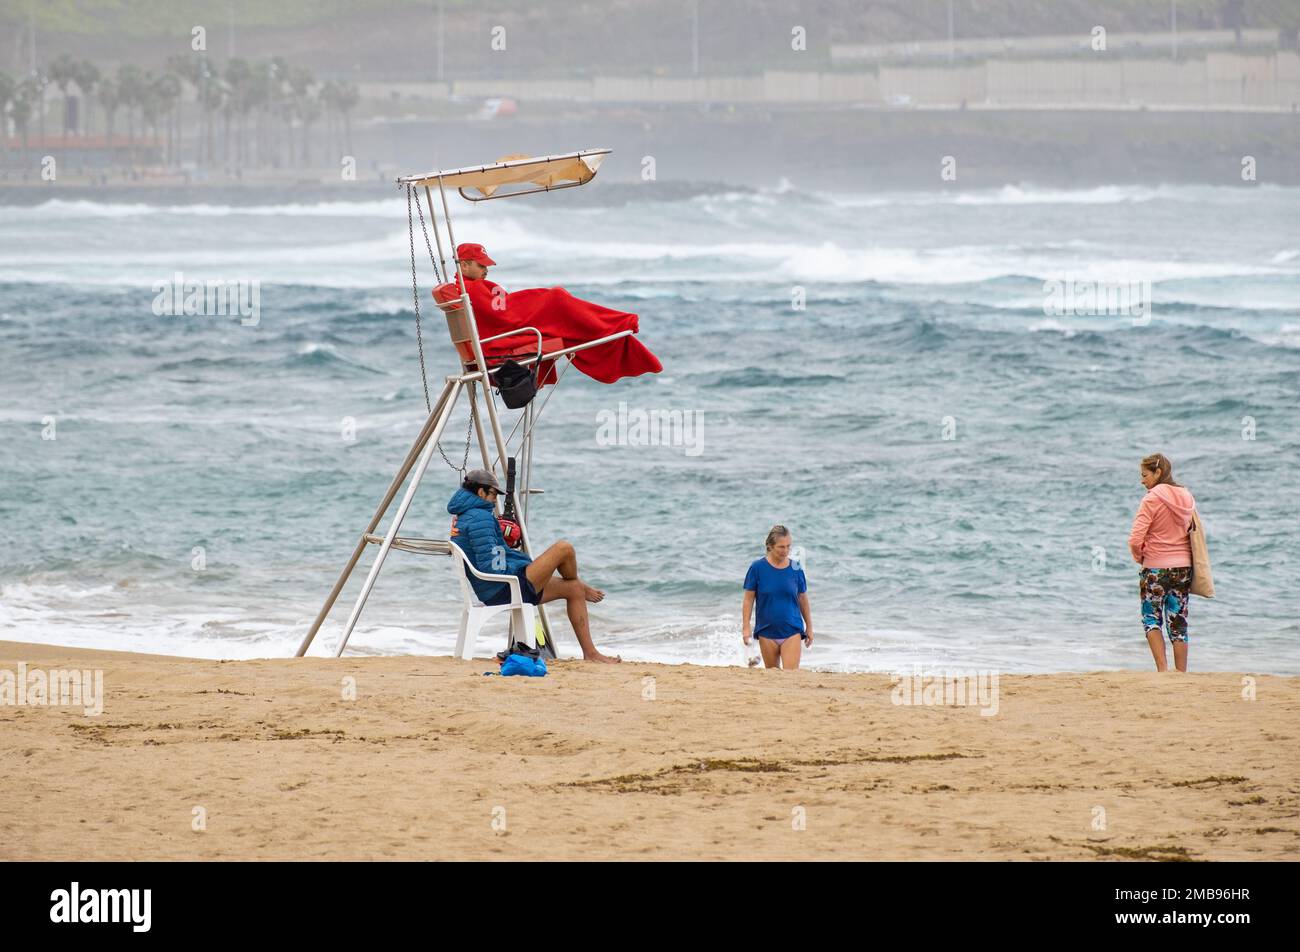 Las Palmas, Gran Canaria, Canary Islands, Spain. 20th January 2023. Cooler weather for British tourists (and lifeguards) on the city beach in Las Palmas on Gran Canaria as a cold front brings rain, strong winds, and lower temperatures to the Canary Islands. Credit: Alan Dawson/Alamy Live News Stock Photo